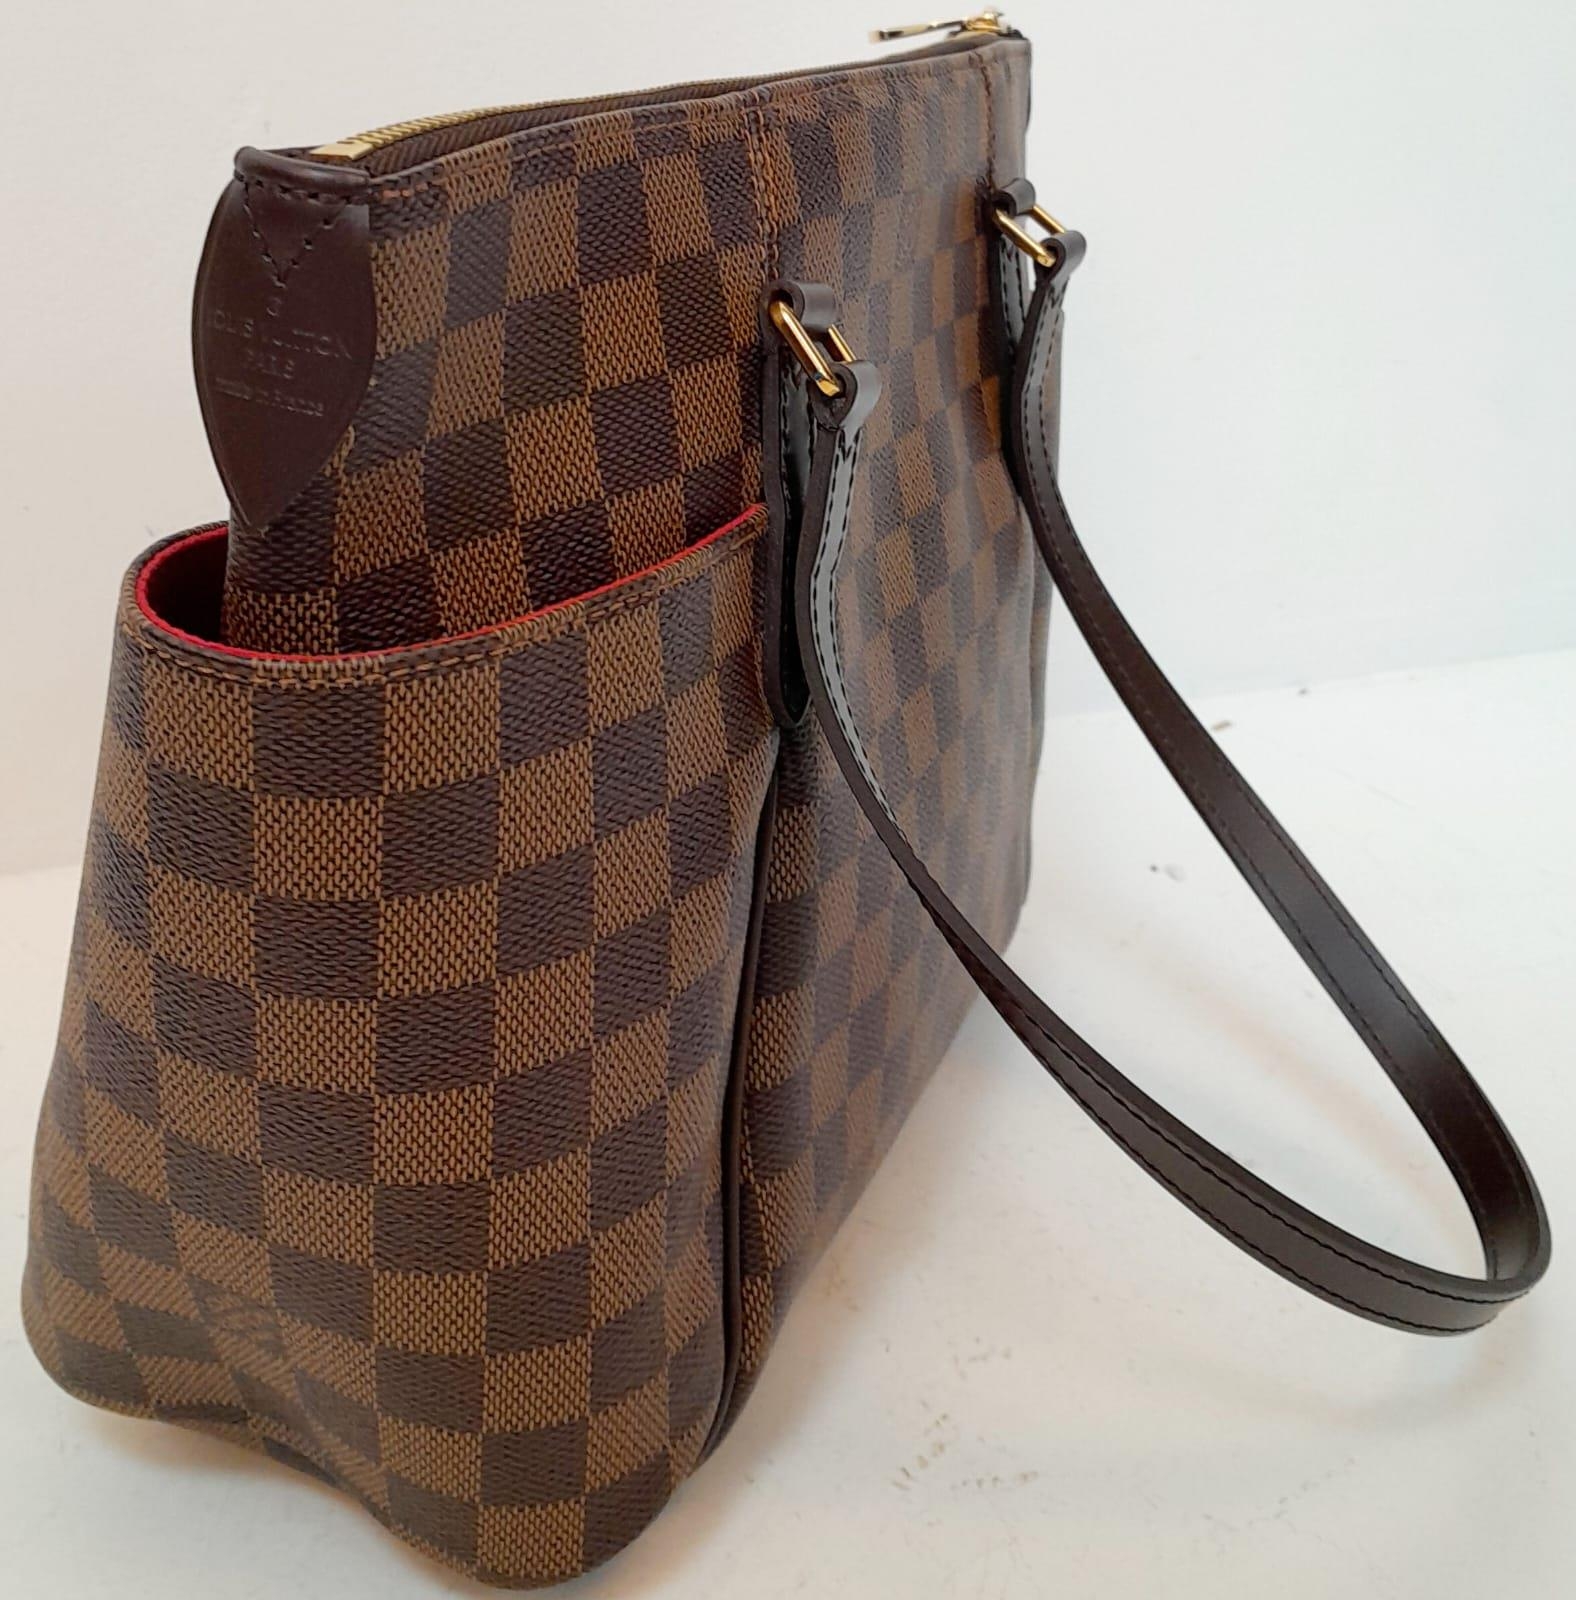 A Louis Vuitton Damier Ebene 'Totally PM' Shoulder Bag. Leather exterior with gold-toned hardware, - Image 2 of 4